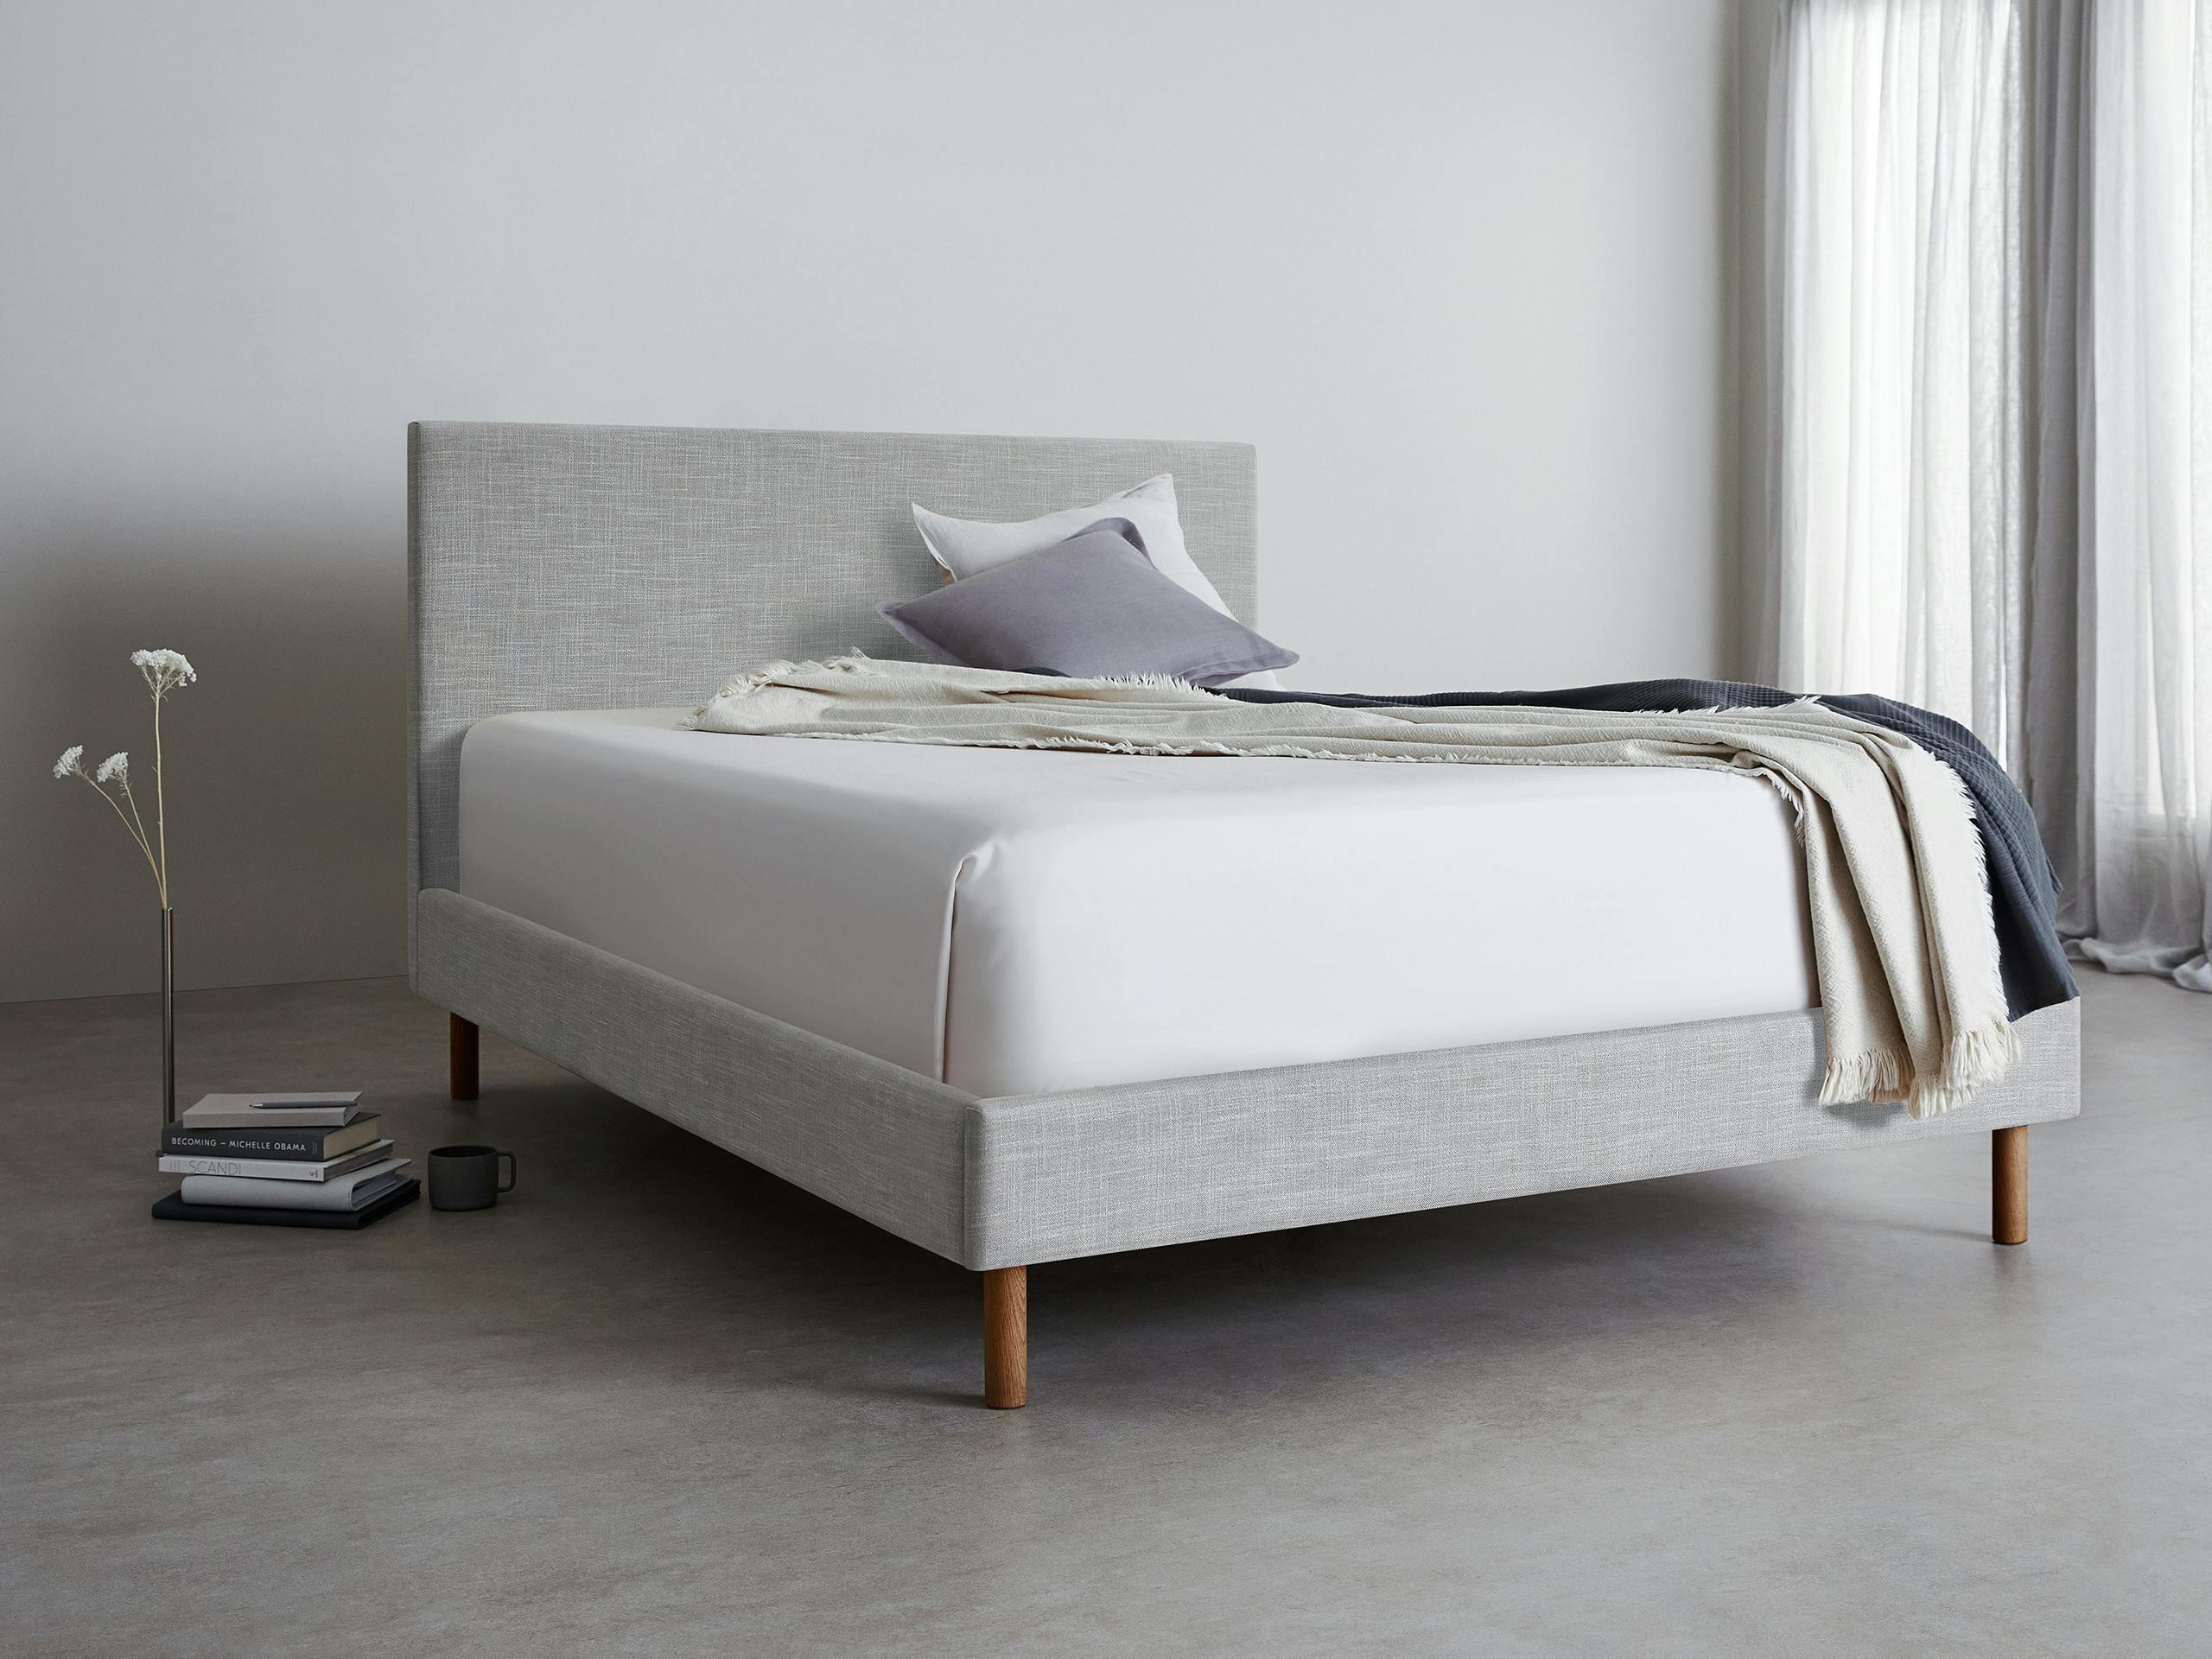 A light grey SD Indestruct Bed bed frame in a three quarter view with a mattress and throw.